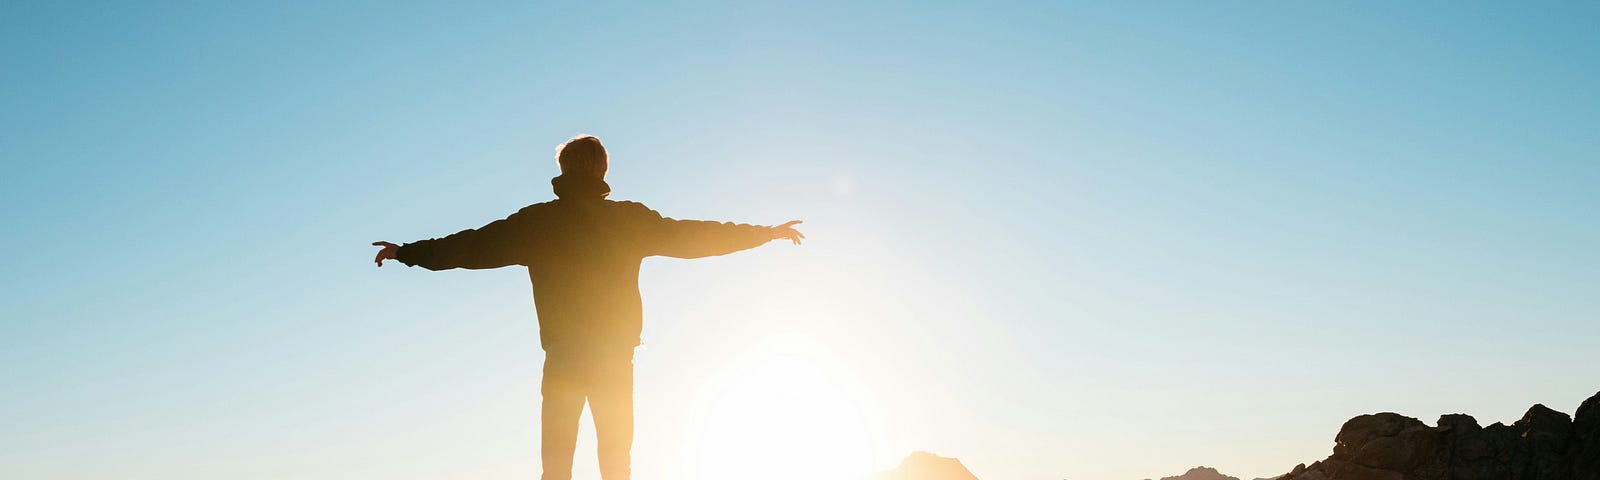 This image depicts a man with arms wide open, embracing the sunrise.